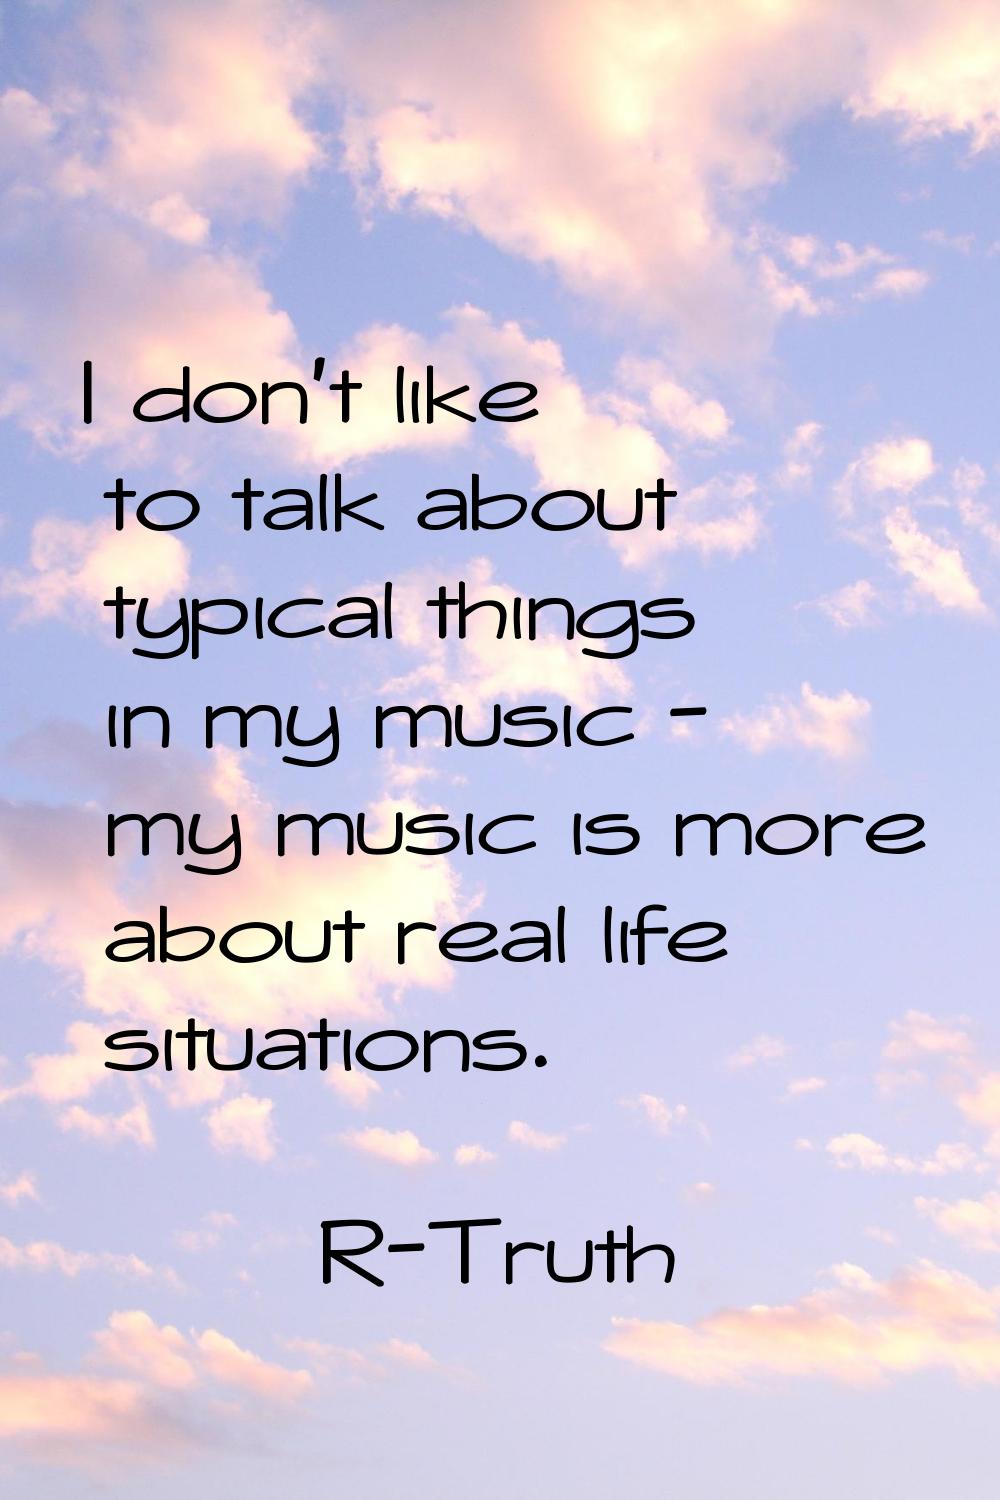 I don't like to talk about typical things in my music - my music is more about real life situations